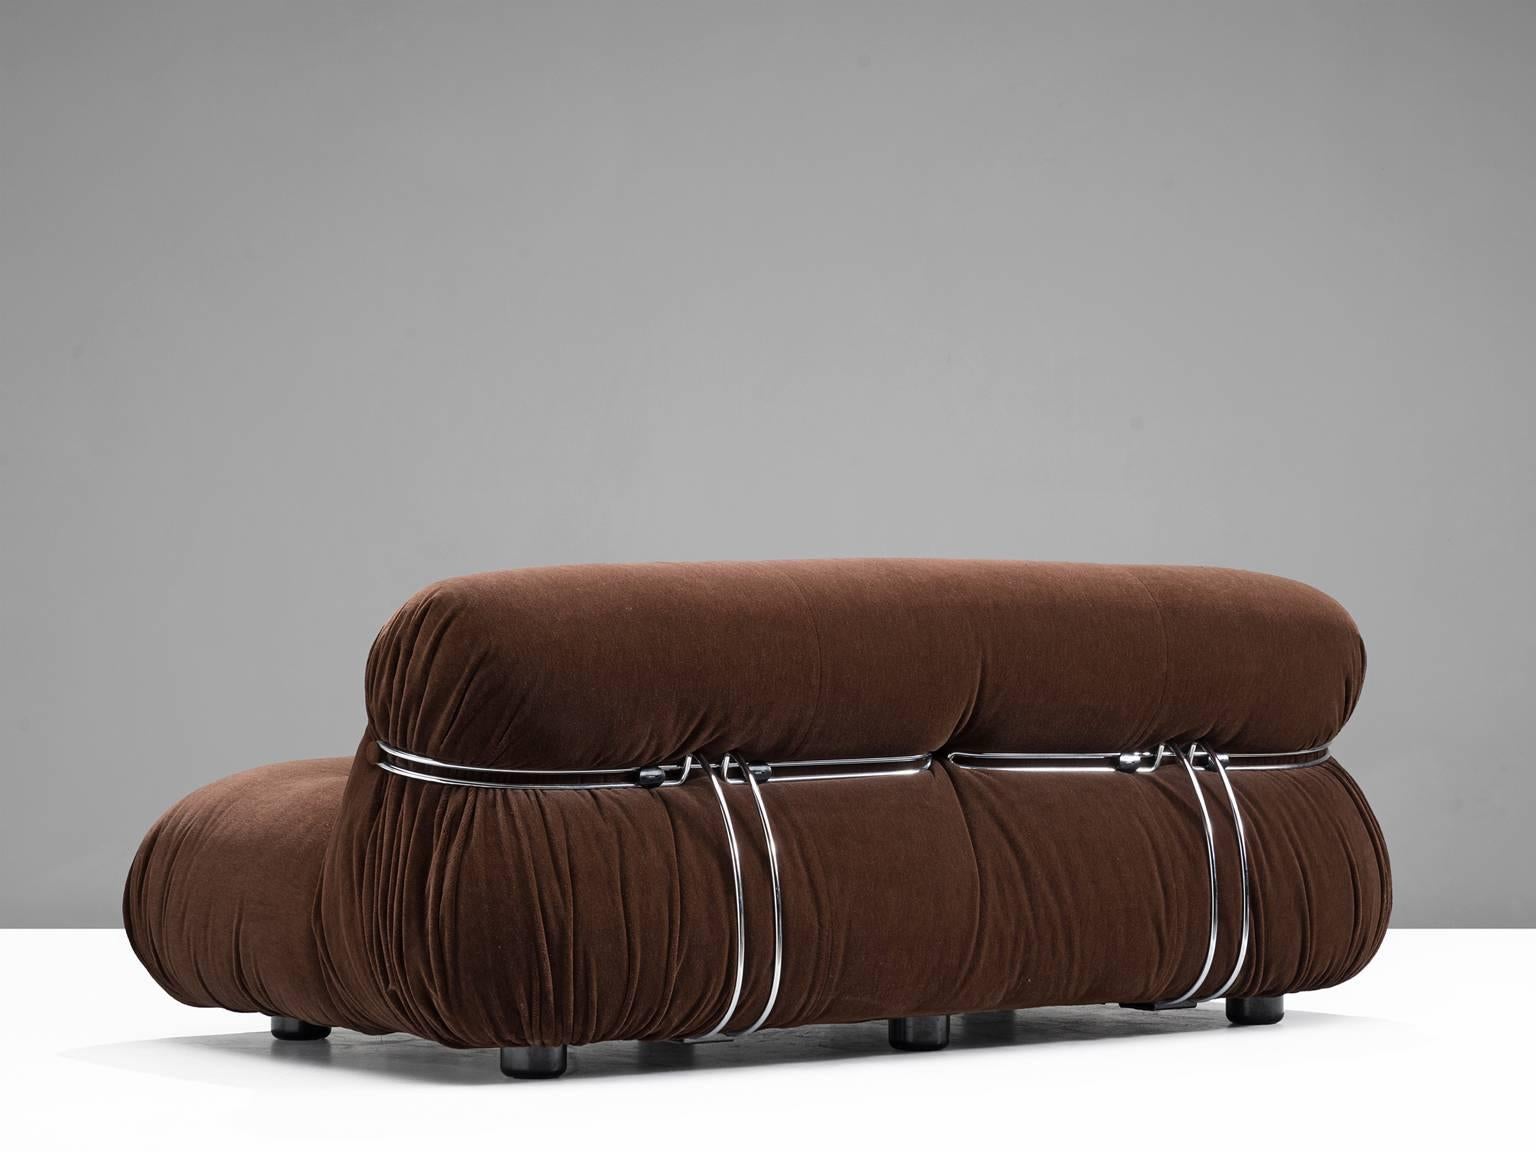 'Soriana' lounge chair and ottoman, in fabric and metal, by Afra & Tobia Scarpa for Cassina, Italy, 1969. 

Iconic sofa by Italian designer couple Afra & Tobia Scarpa, the Soriana proposes a model that institutionalizes the image of the informal